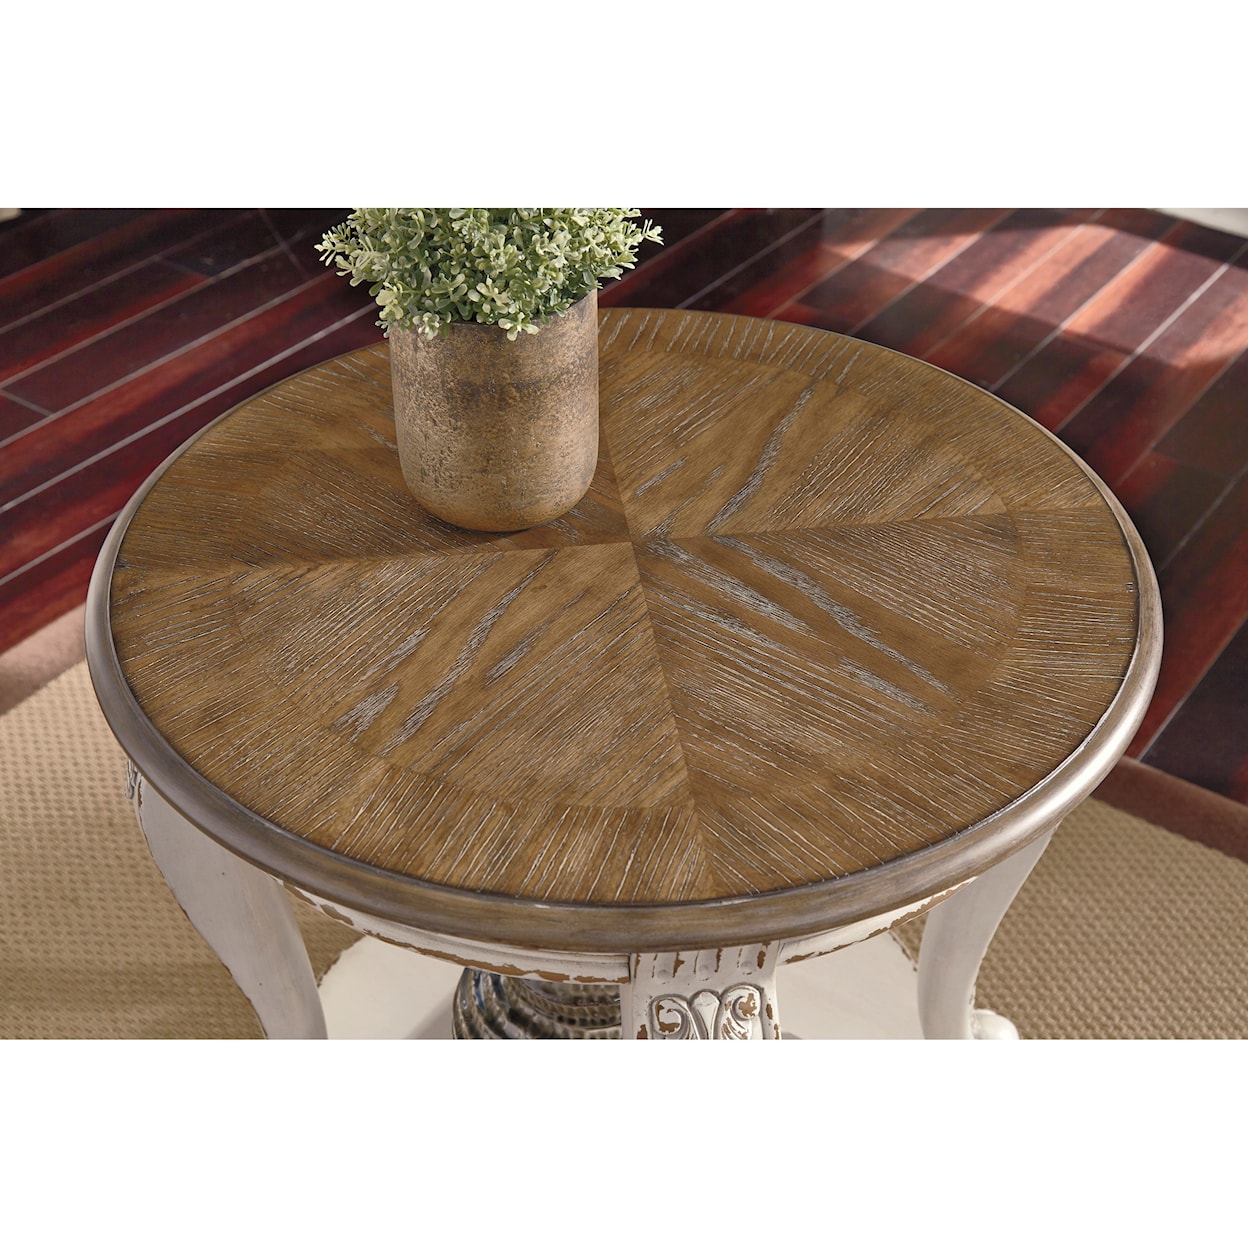 Signature Design by Ashley Realyn Round End Table